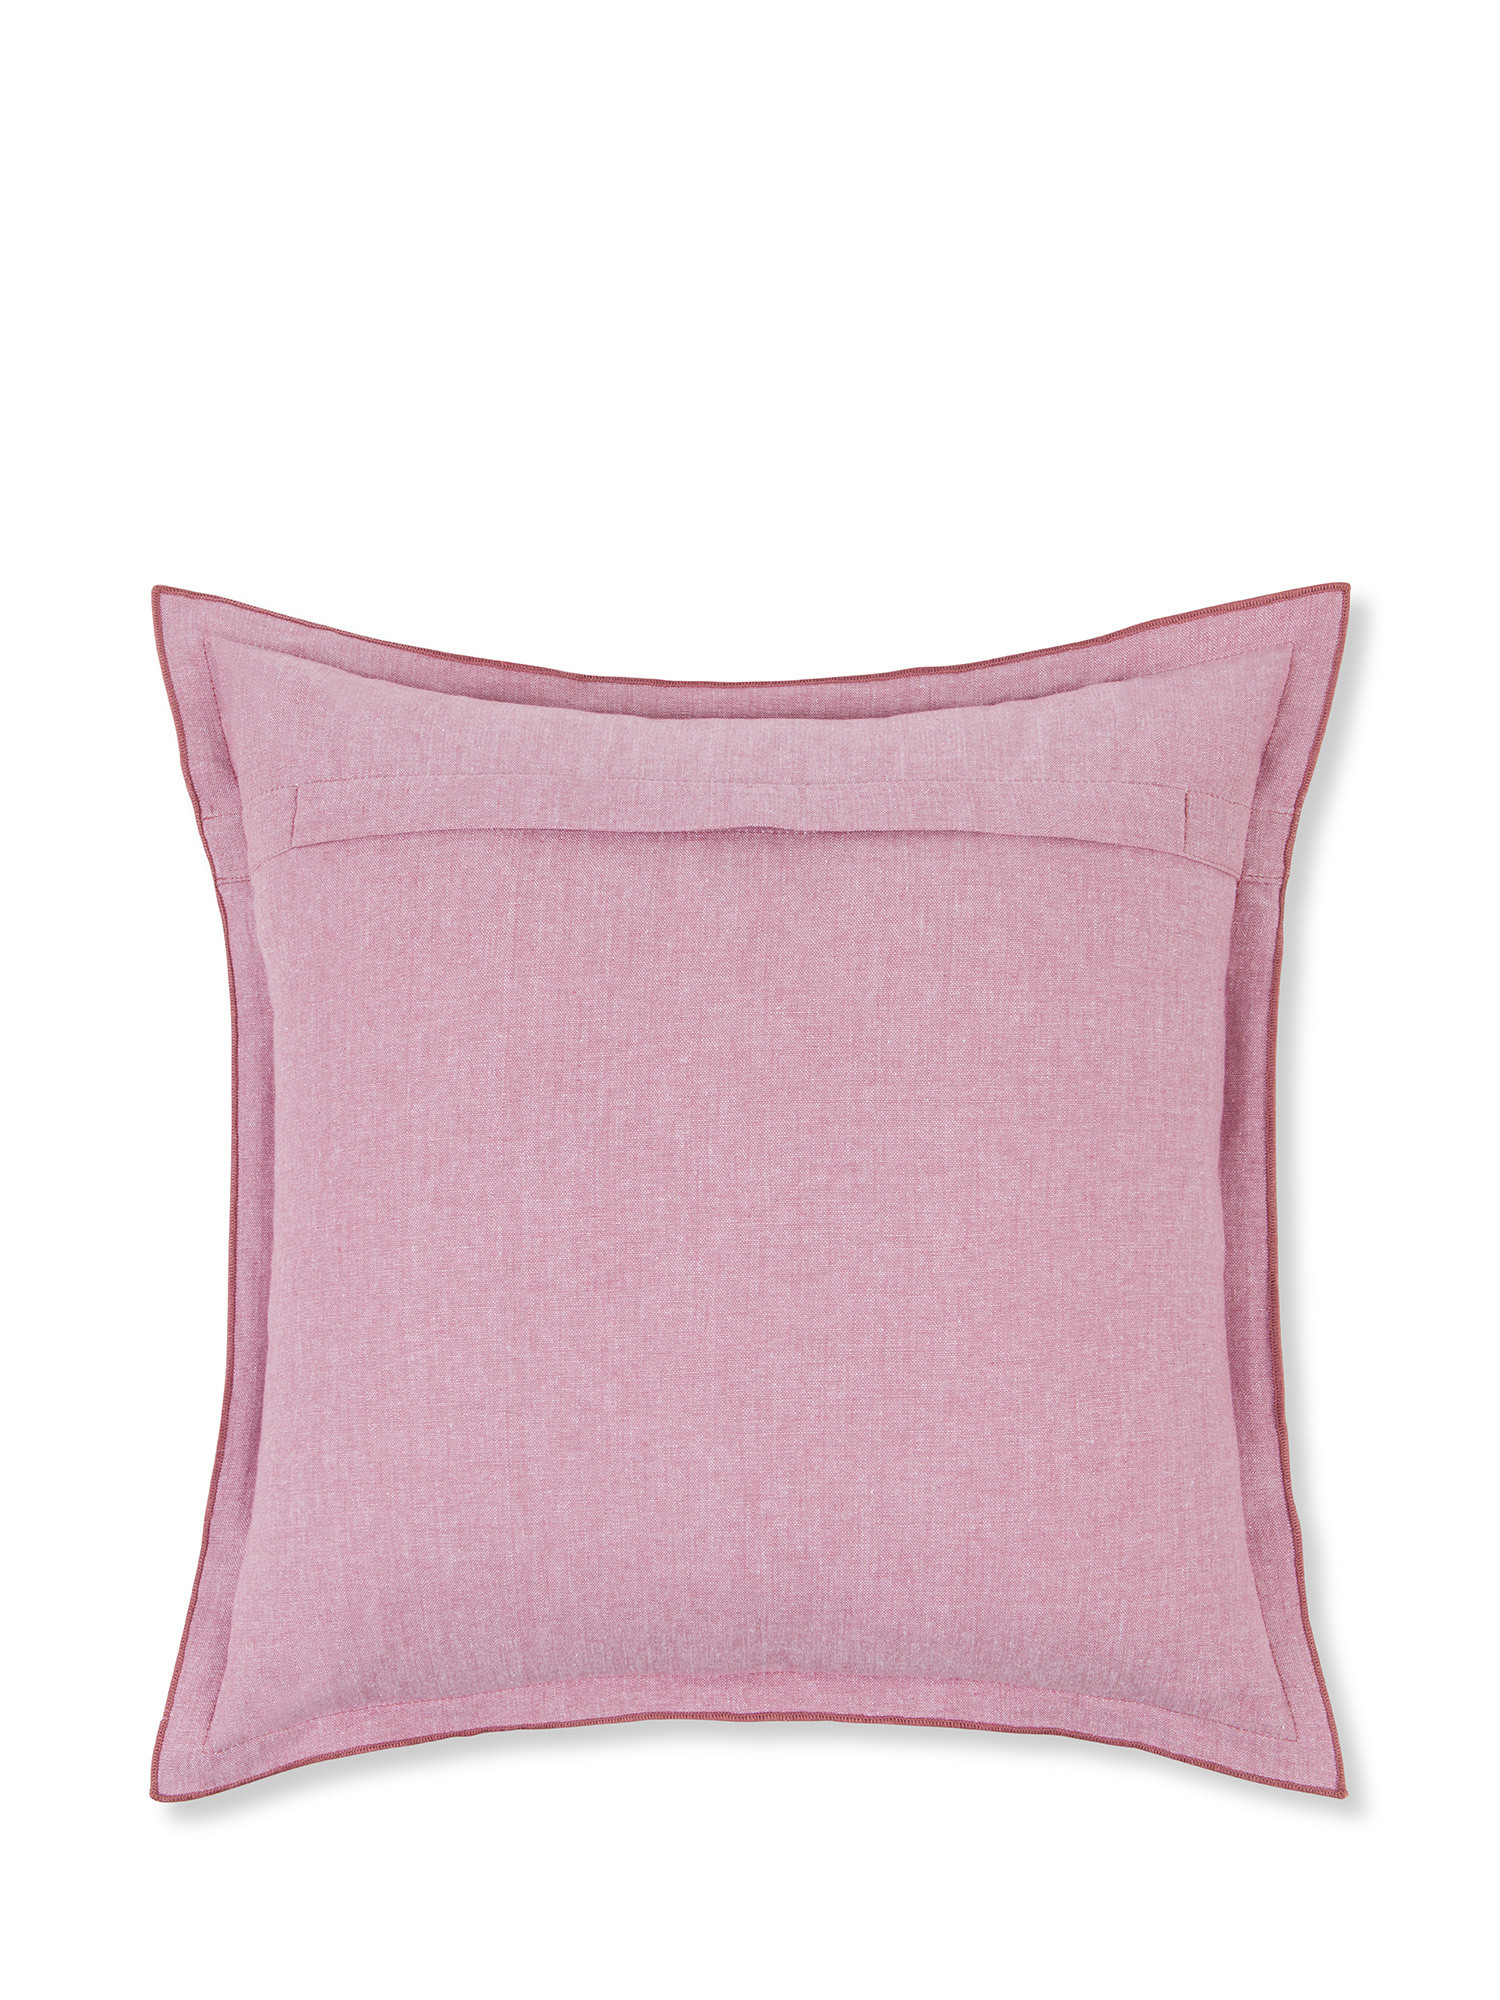 Cuscino cotone chambray 45x45cm, Rosa, large image number 1